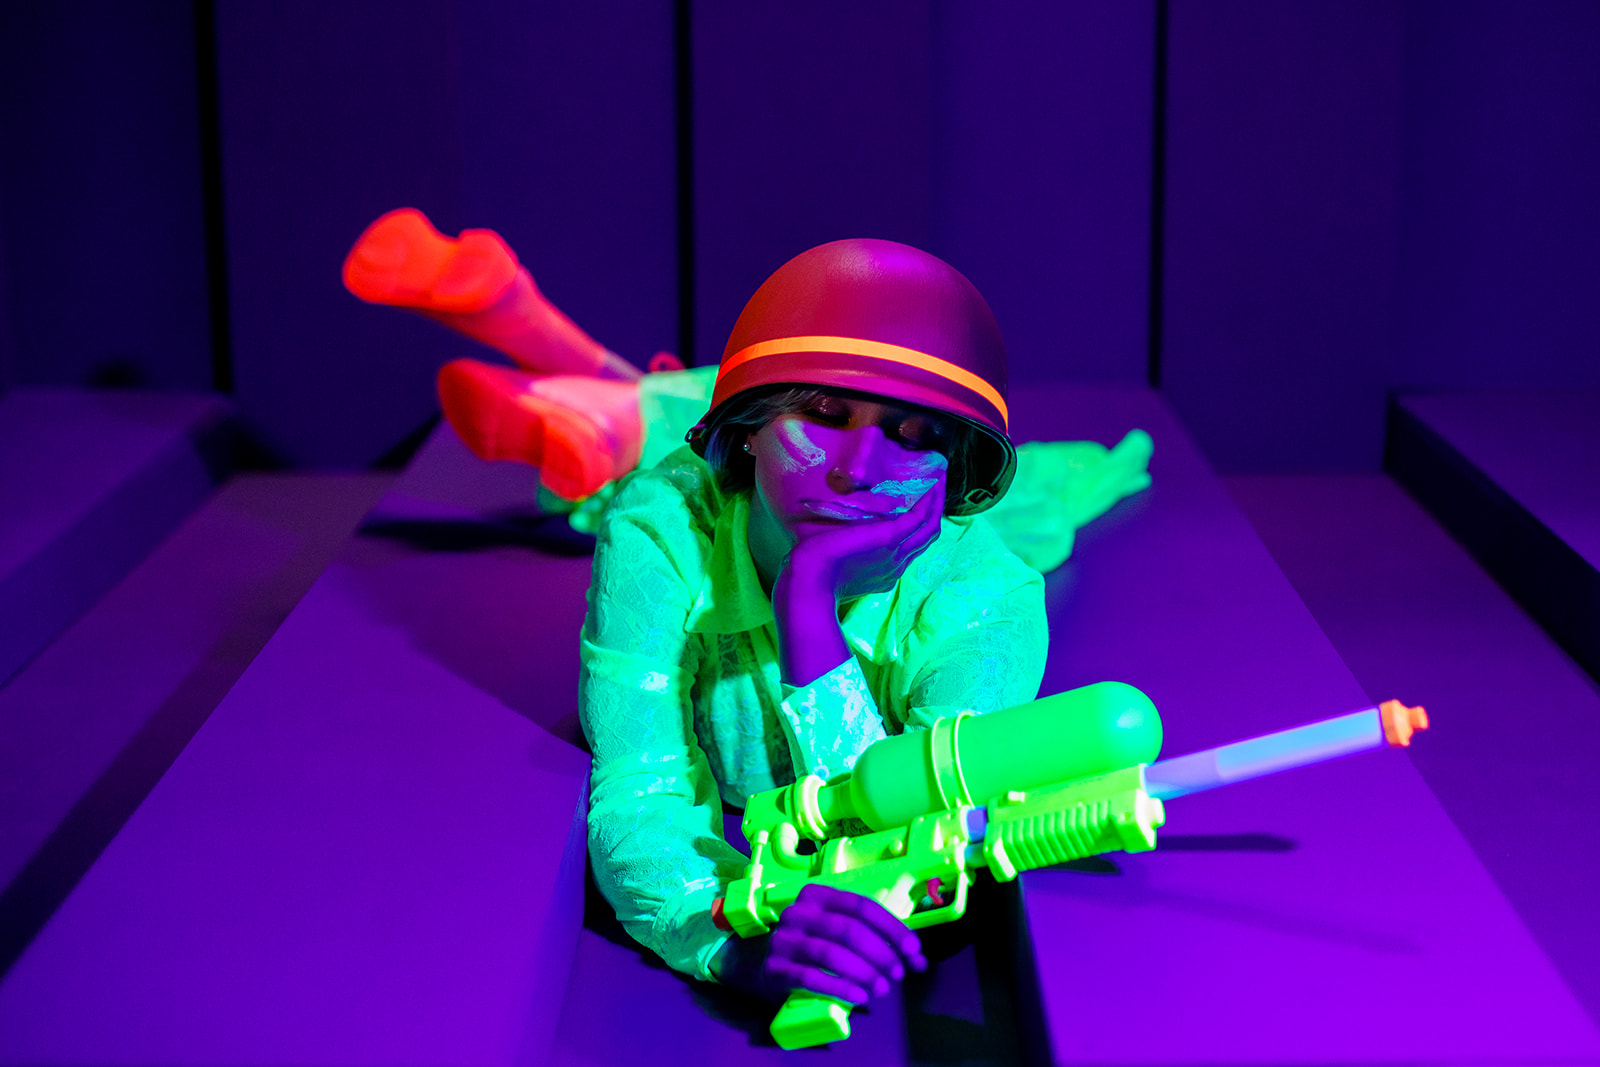 Super Soaker 90s Inspired Neon Military Shoot - Image Property of www.j-dphoto.com